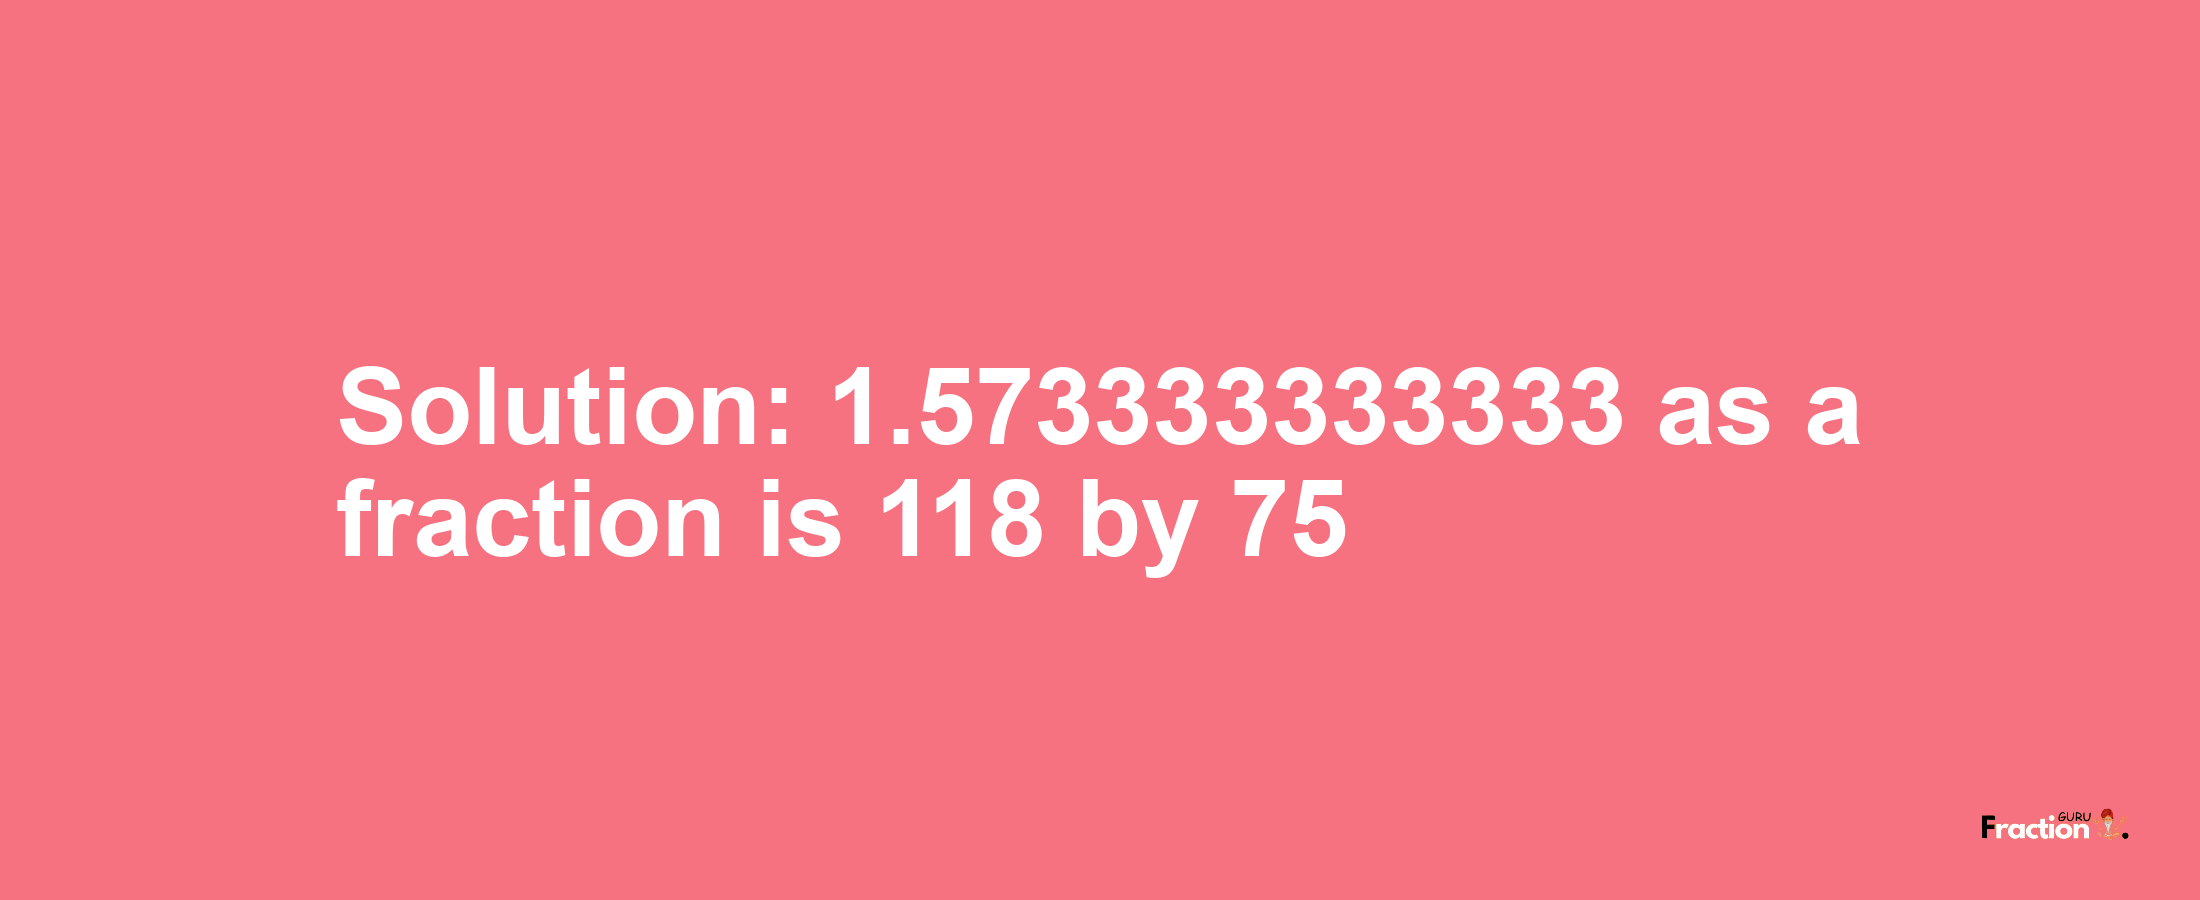 Solution:1.573333333333 as a fraction is 118/75